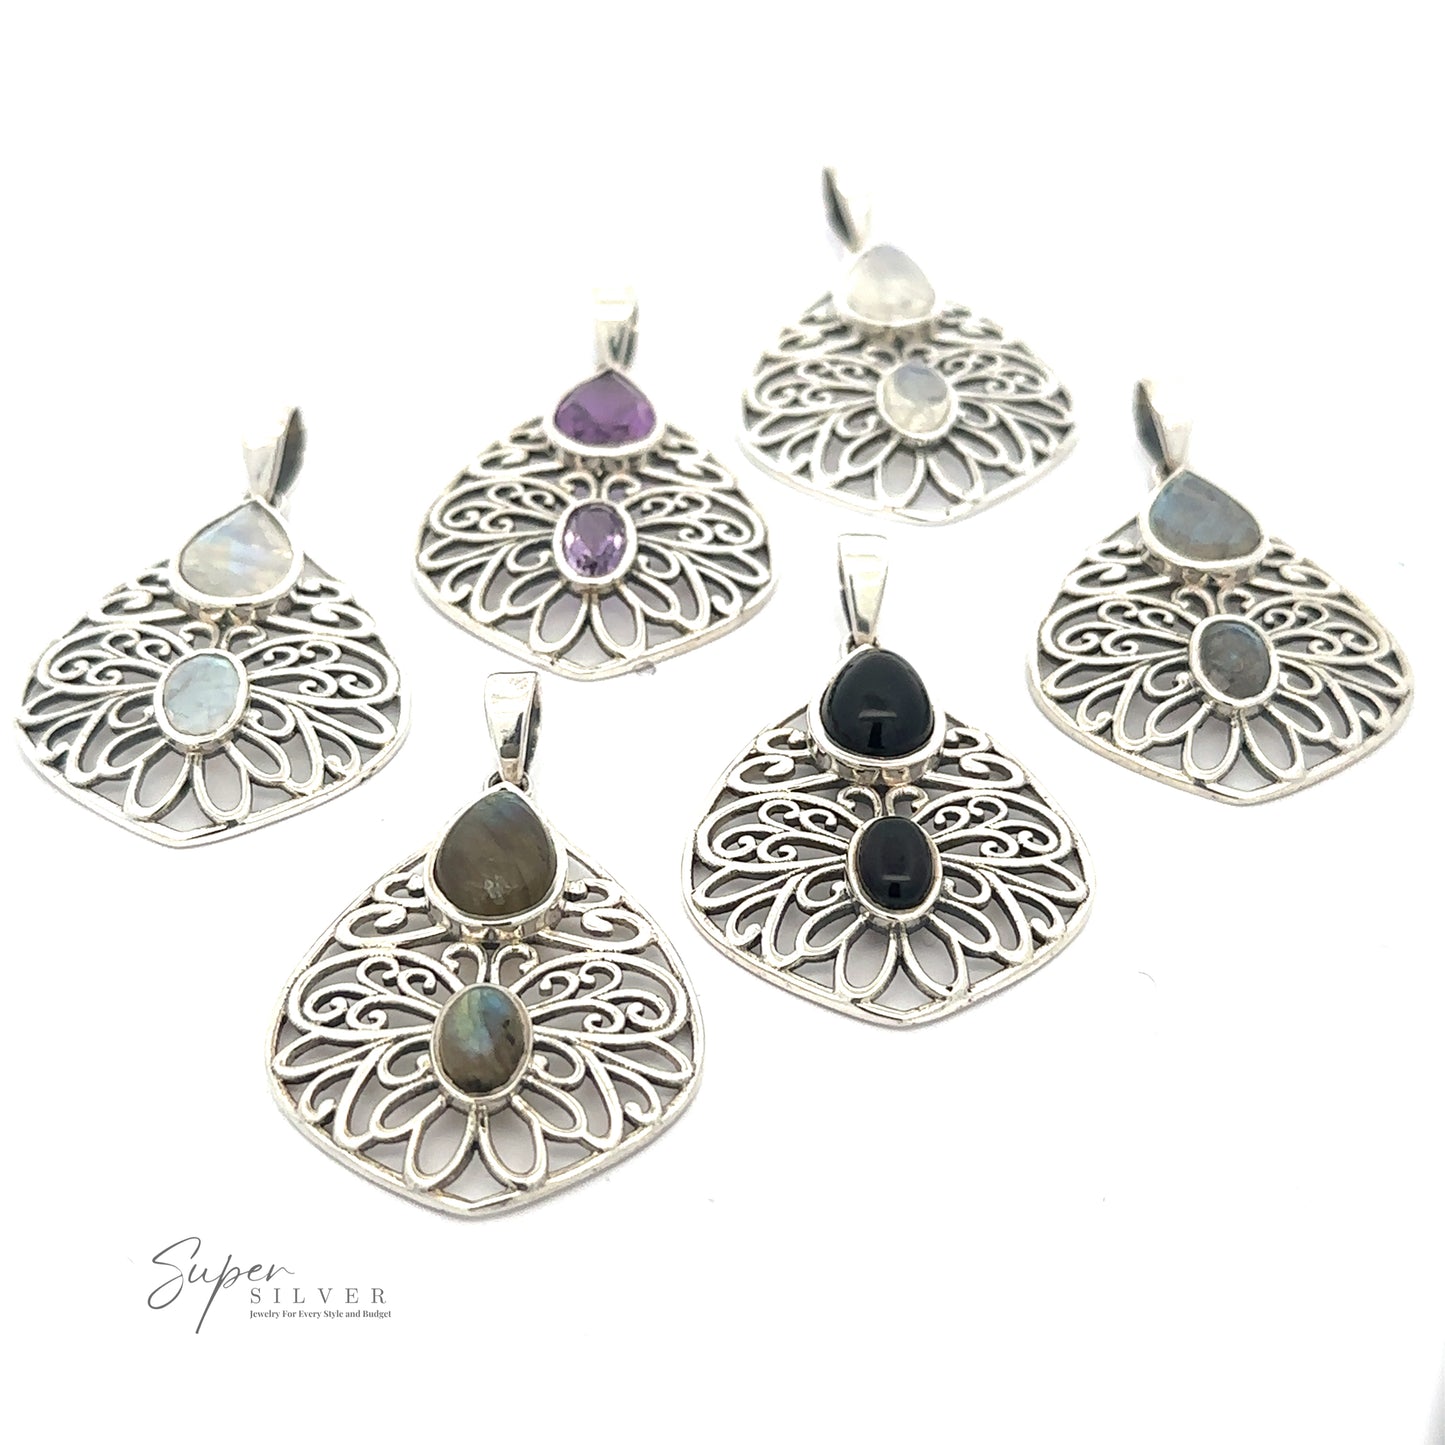 
                  
                    A collection of six Teardrop Filigree Gemstone Pendants with various gemstones, including moonstone, amethyst, and a striking onyx pendant, displayed against a white background. The logo "Super Silver" is visible in the corner.
                  
                